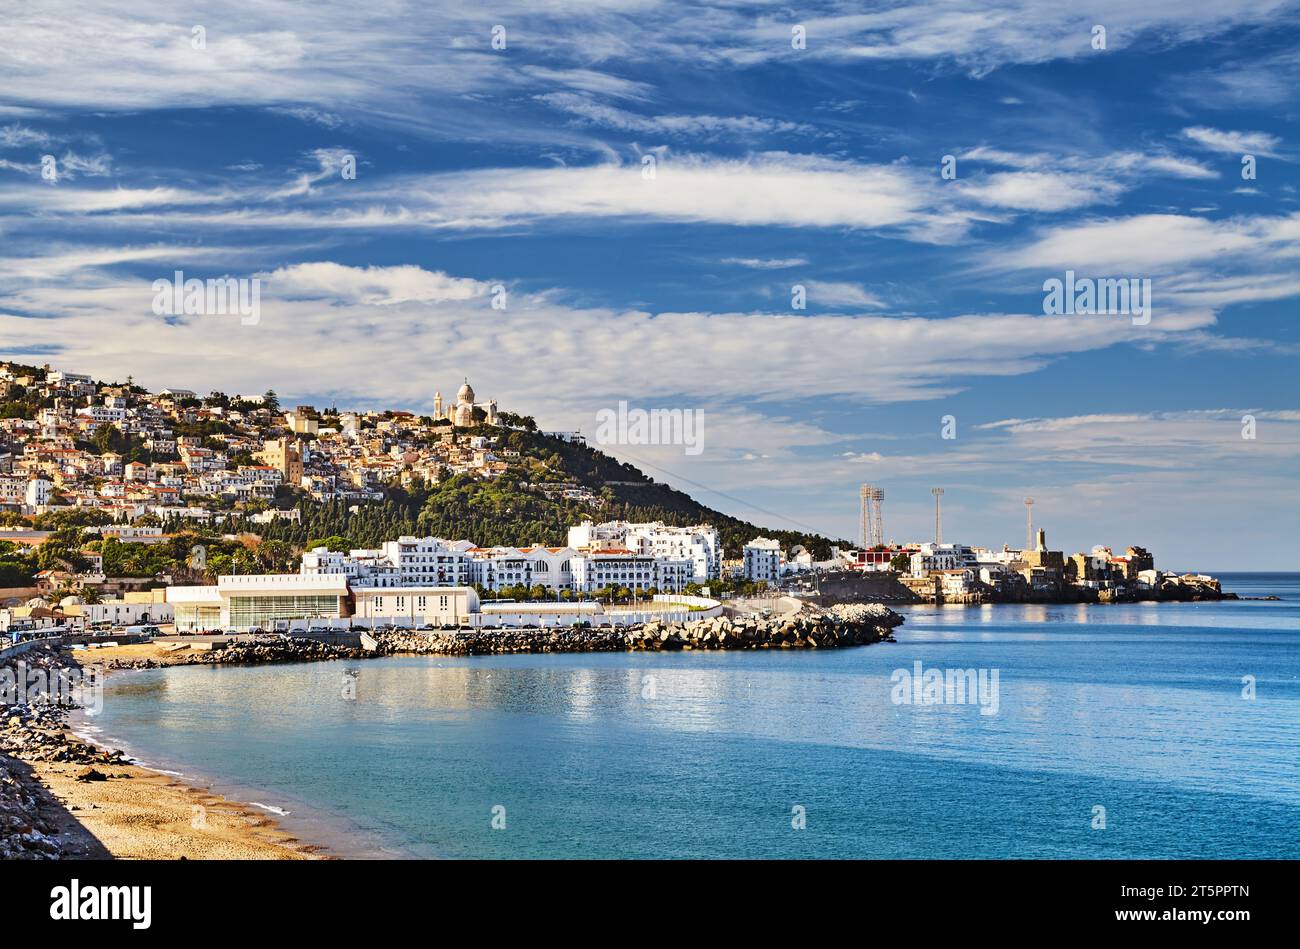 Algiers is the capital and largest city of Algeria, situated on Mediterranean coast of Northern Africa, view of the coast across the bay of Algiers Stock Photo